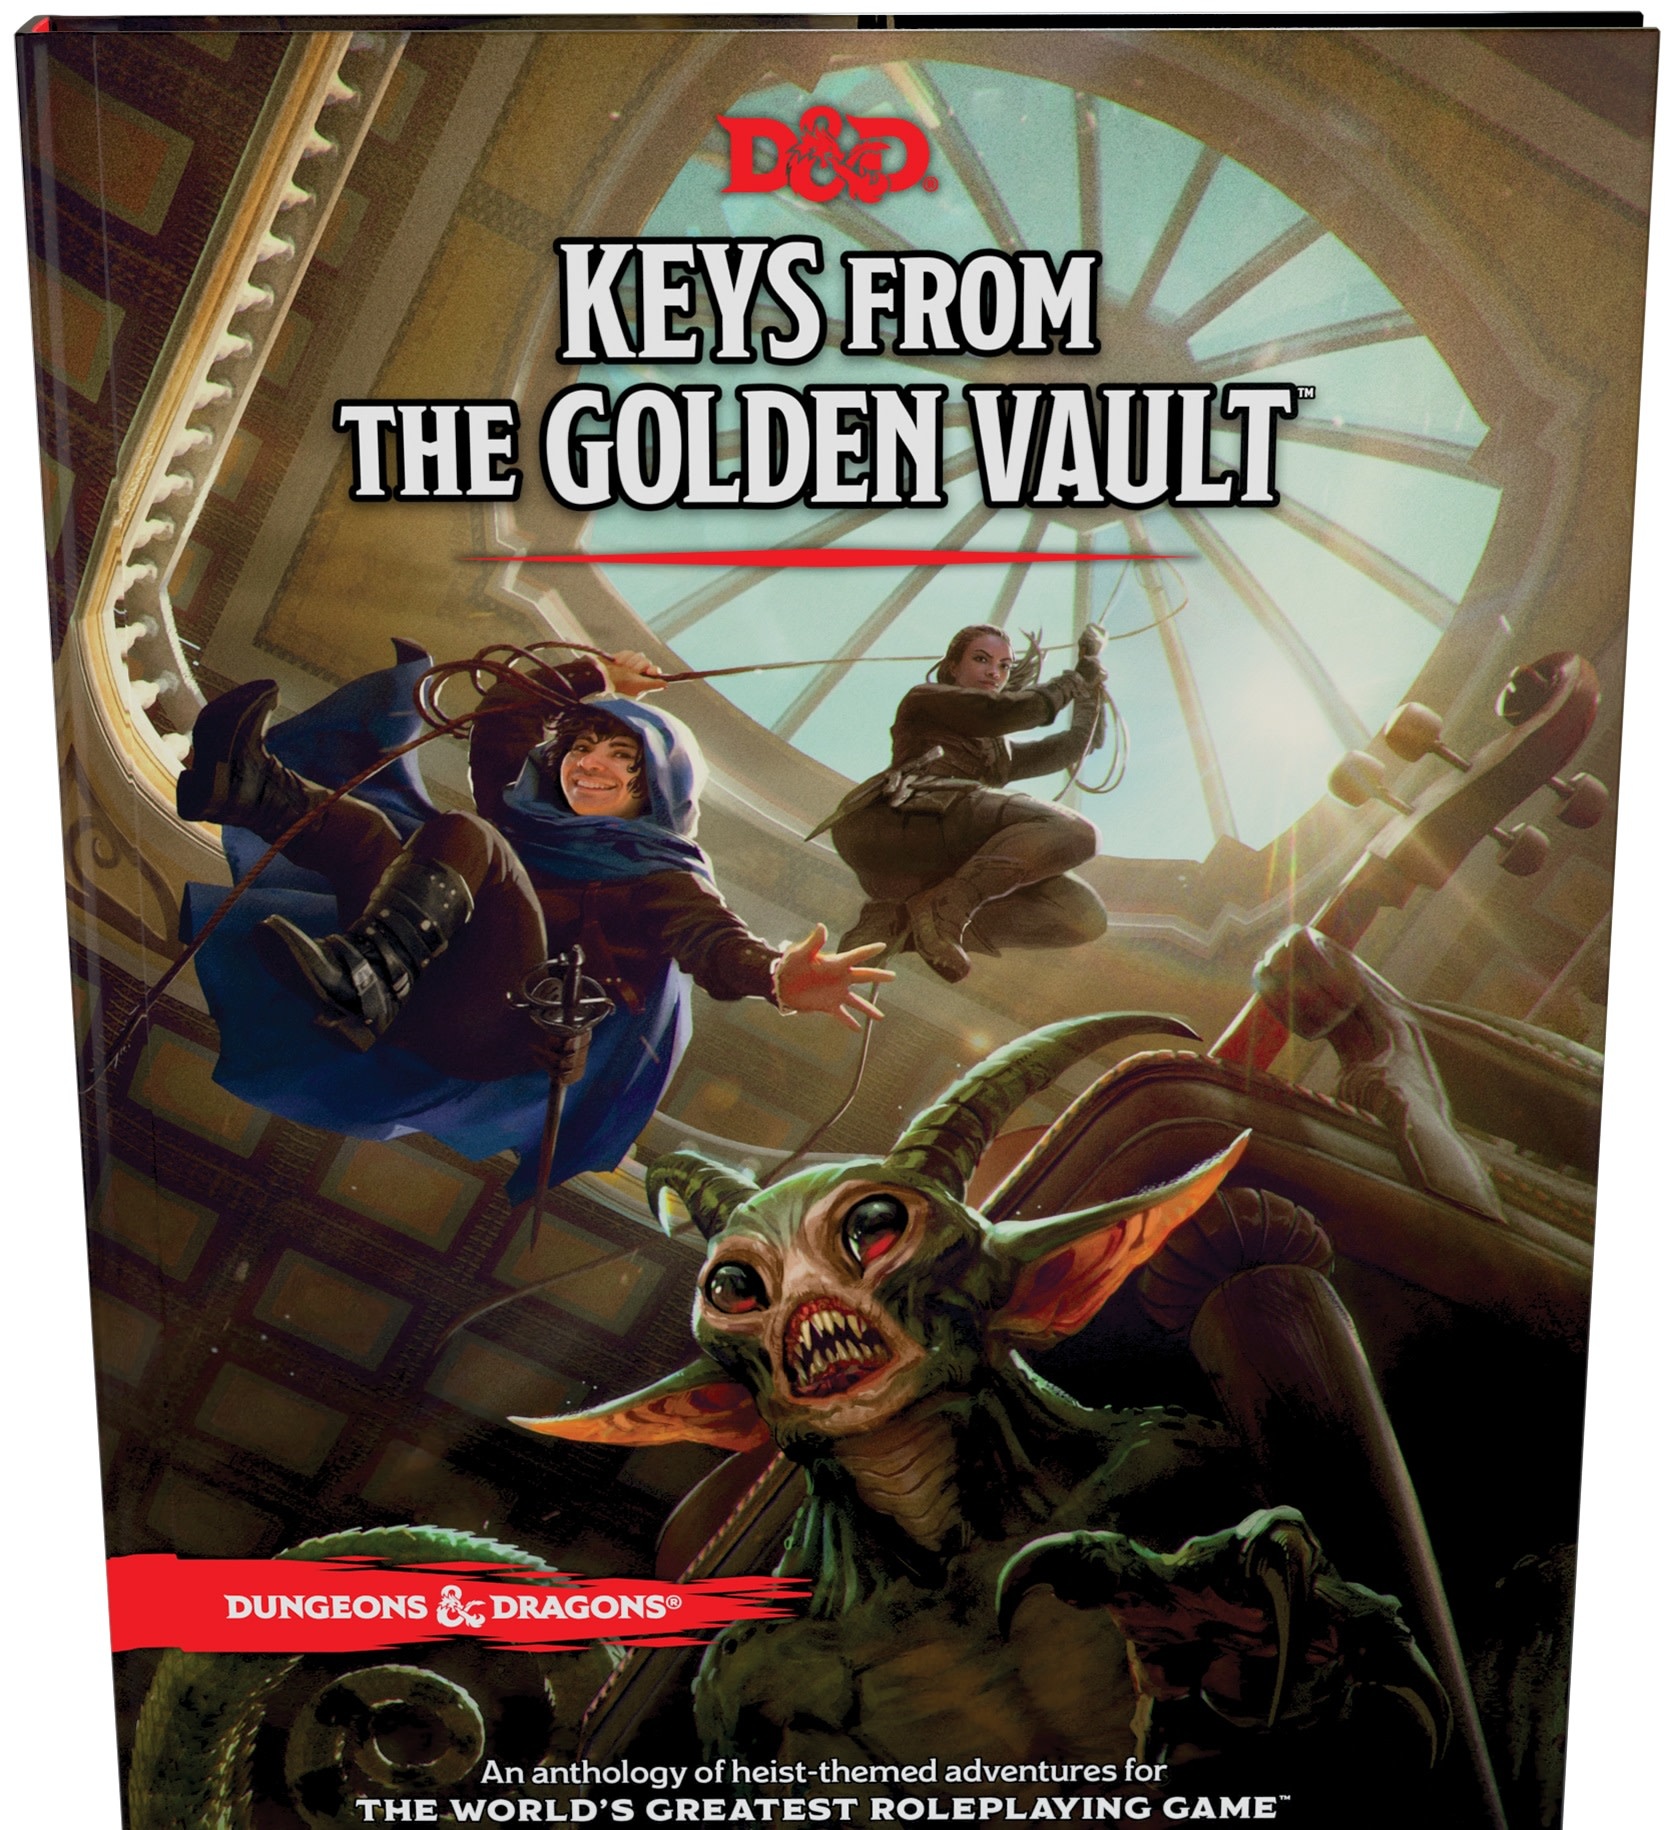 Dungeons and Dragons 5th Edition RPG: Keys from the Golden Vault